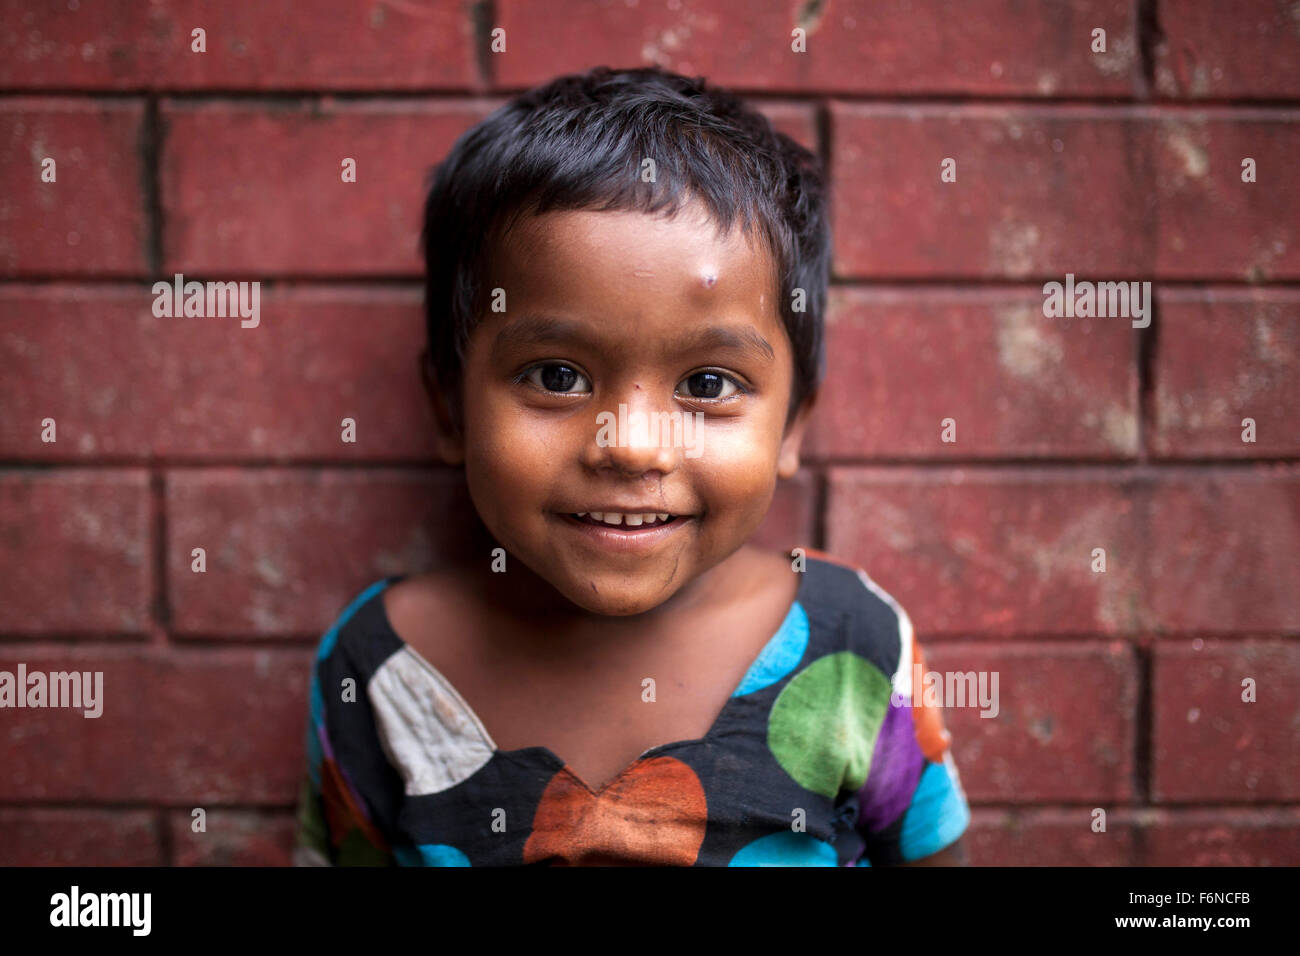 DHAKA, BANGLADESH 17th November: Portrait of a street child in front of old building in Old Dhaka on November 17, 2015. Old Dhaka is a term used to refer to the historic old city of Dhaka, the capital of modern Bangladesh. It was founded in 1608 as Jahangir Nagar, the capital of Mughal Bengal. Stock Photo